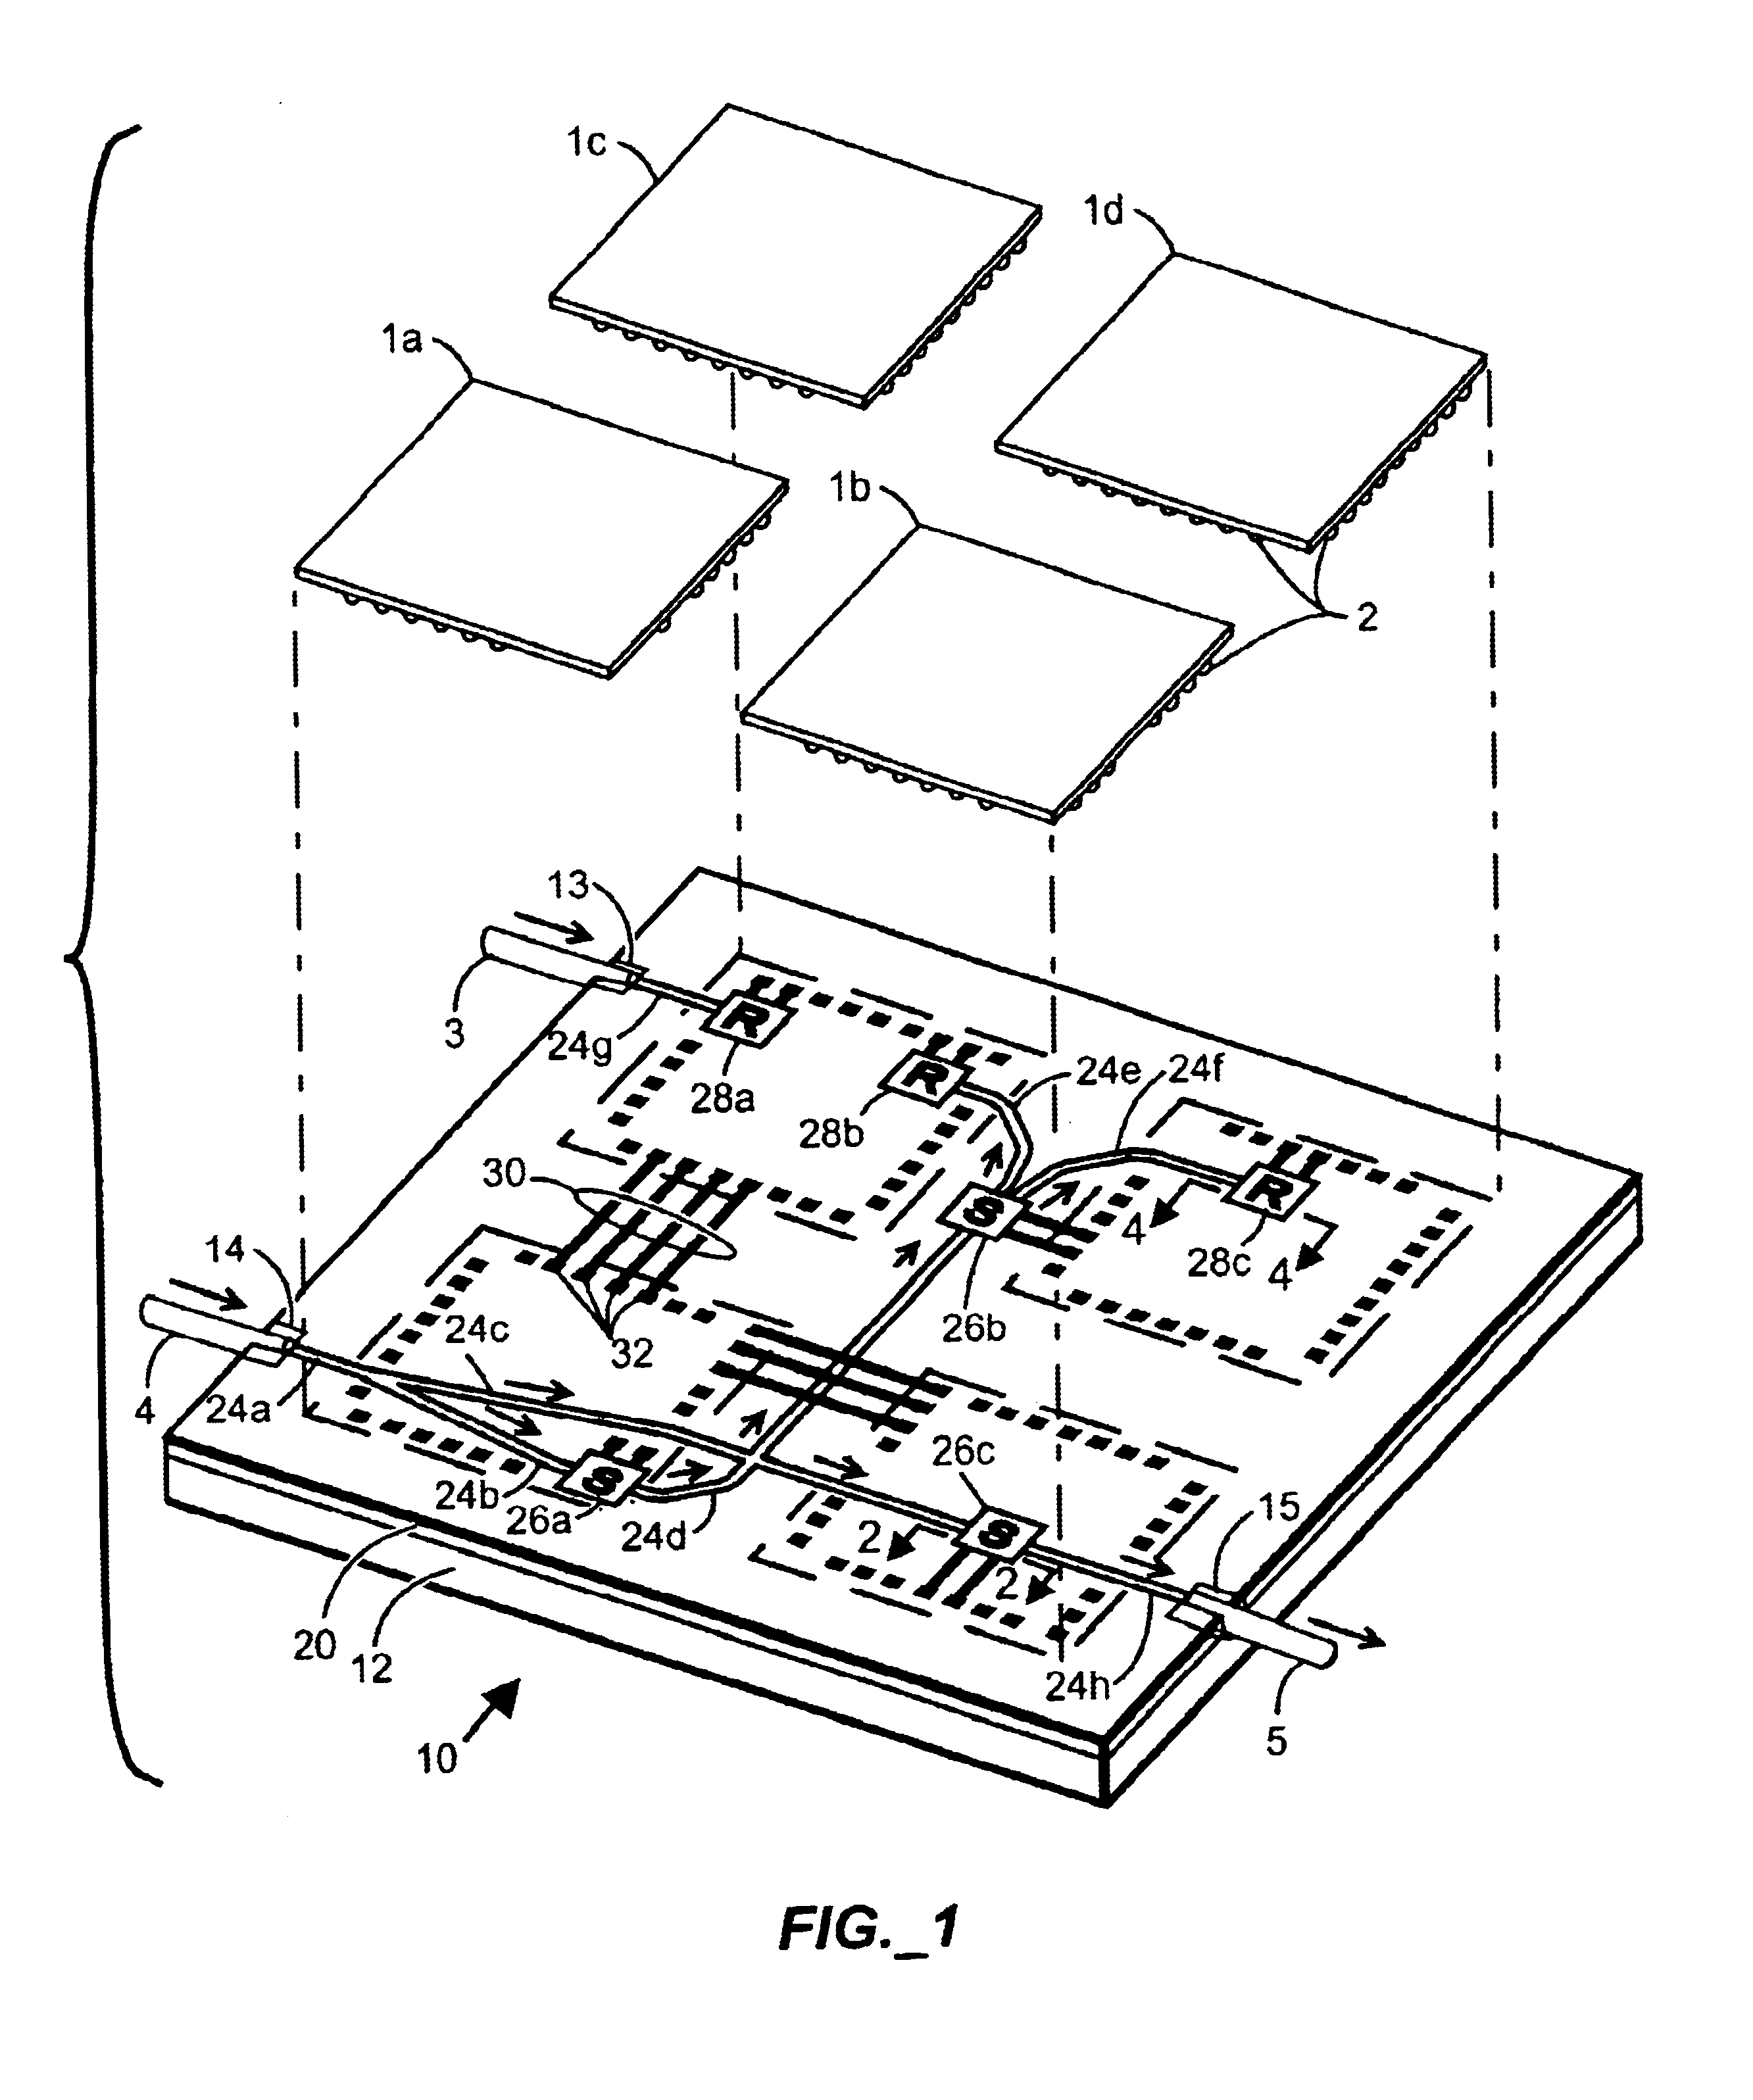 Multi-layer opto-electronic substrates with electrical and optical interconnections and methods for making